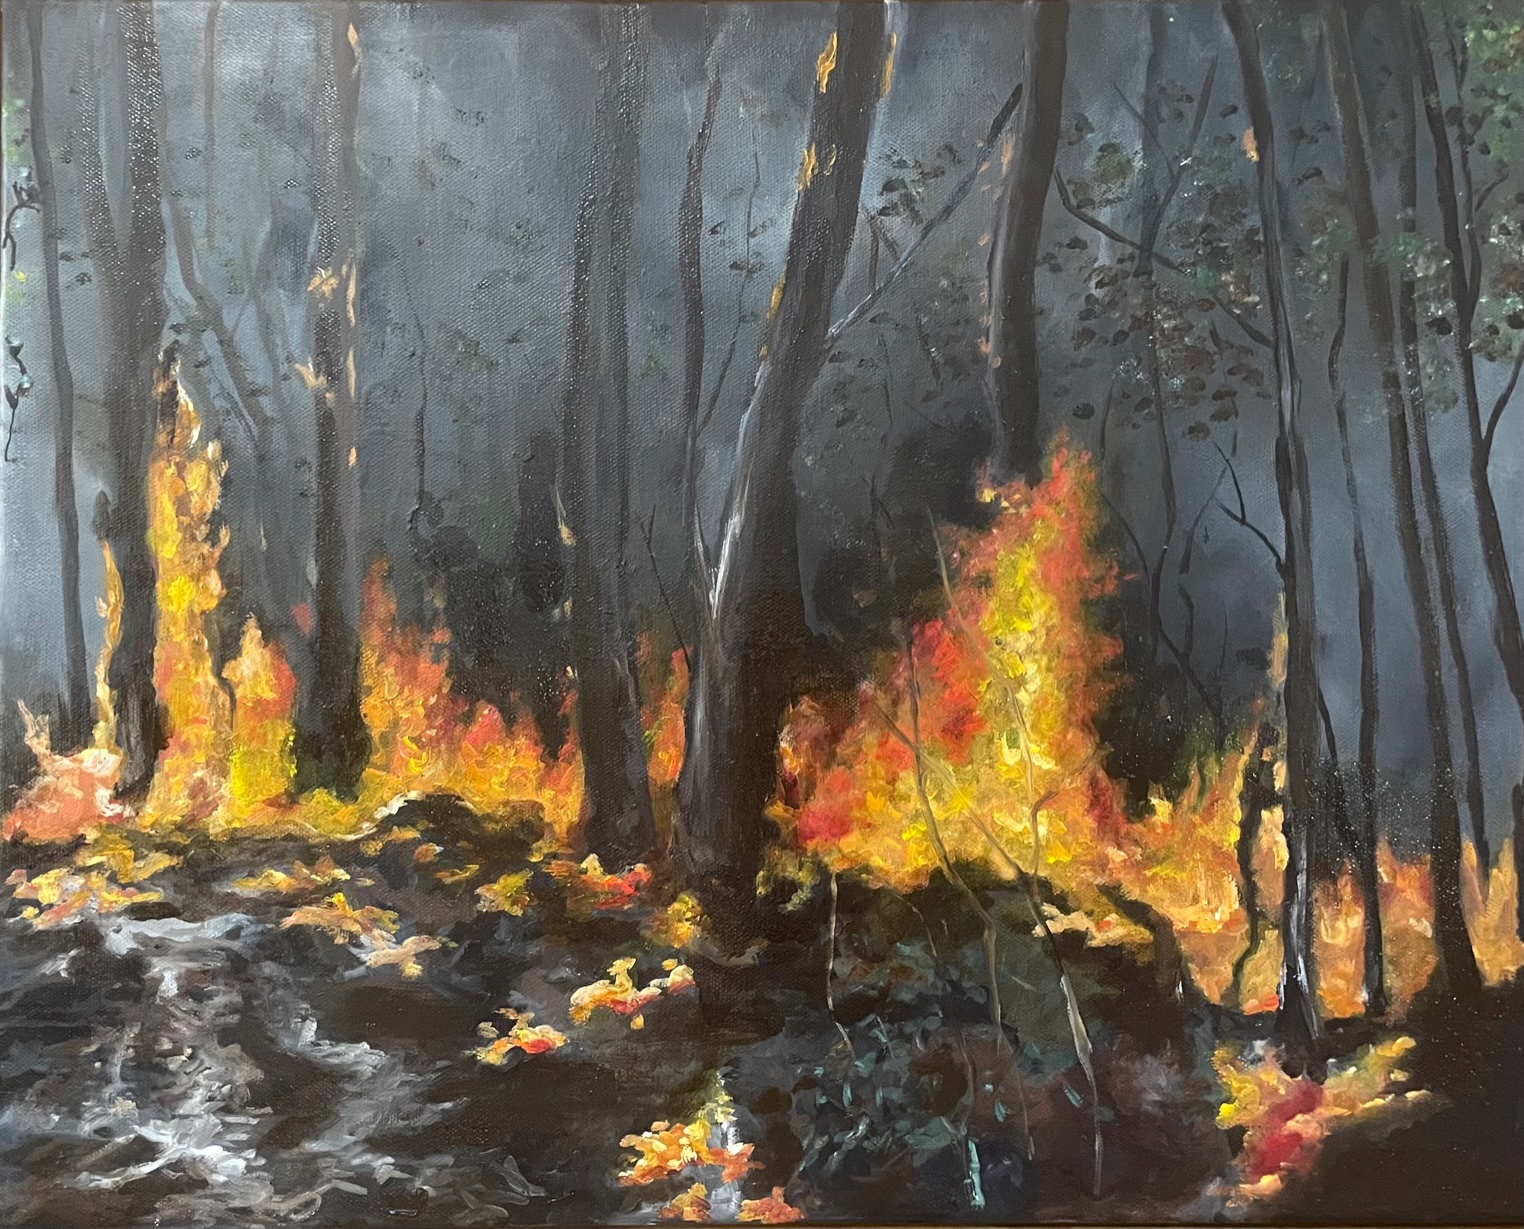 FROM ASHES TO ART: THE DANCE OF LIGHT AND DARKNESS KRISTY LYN OSSEWEYER